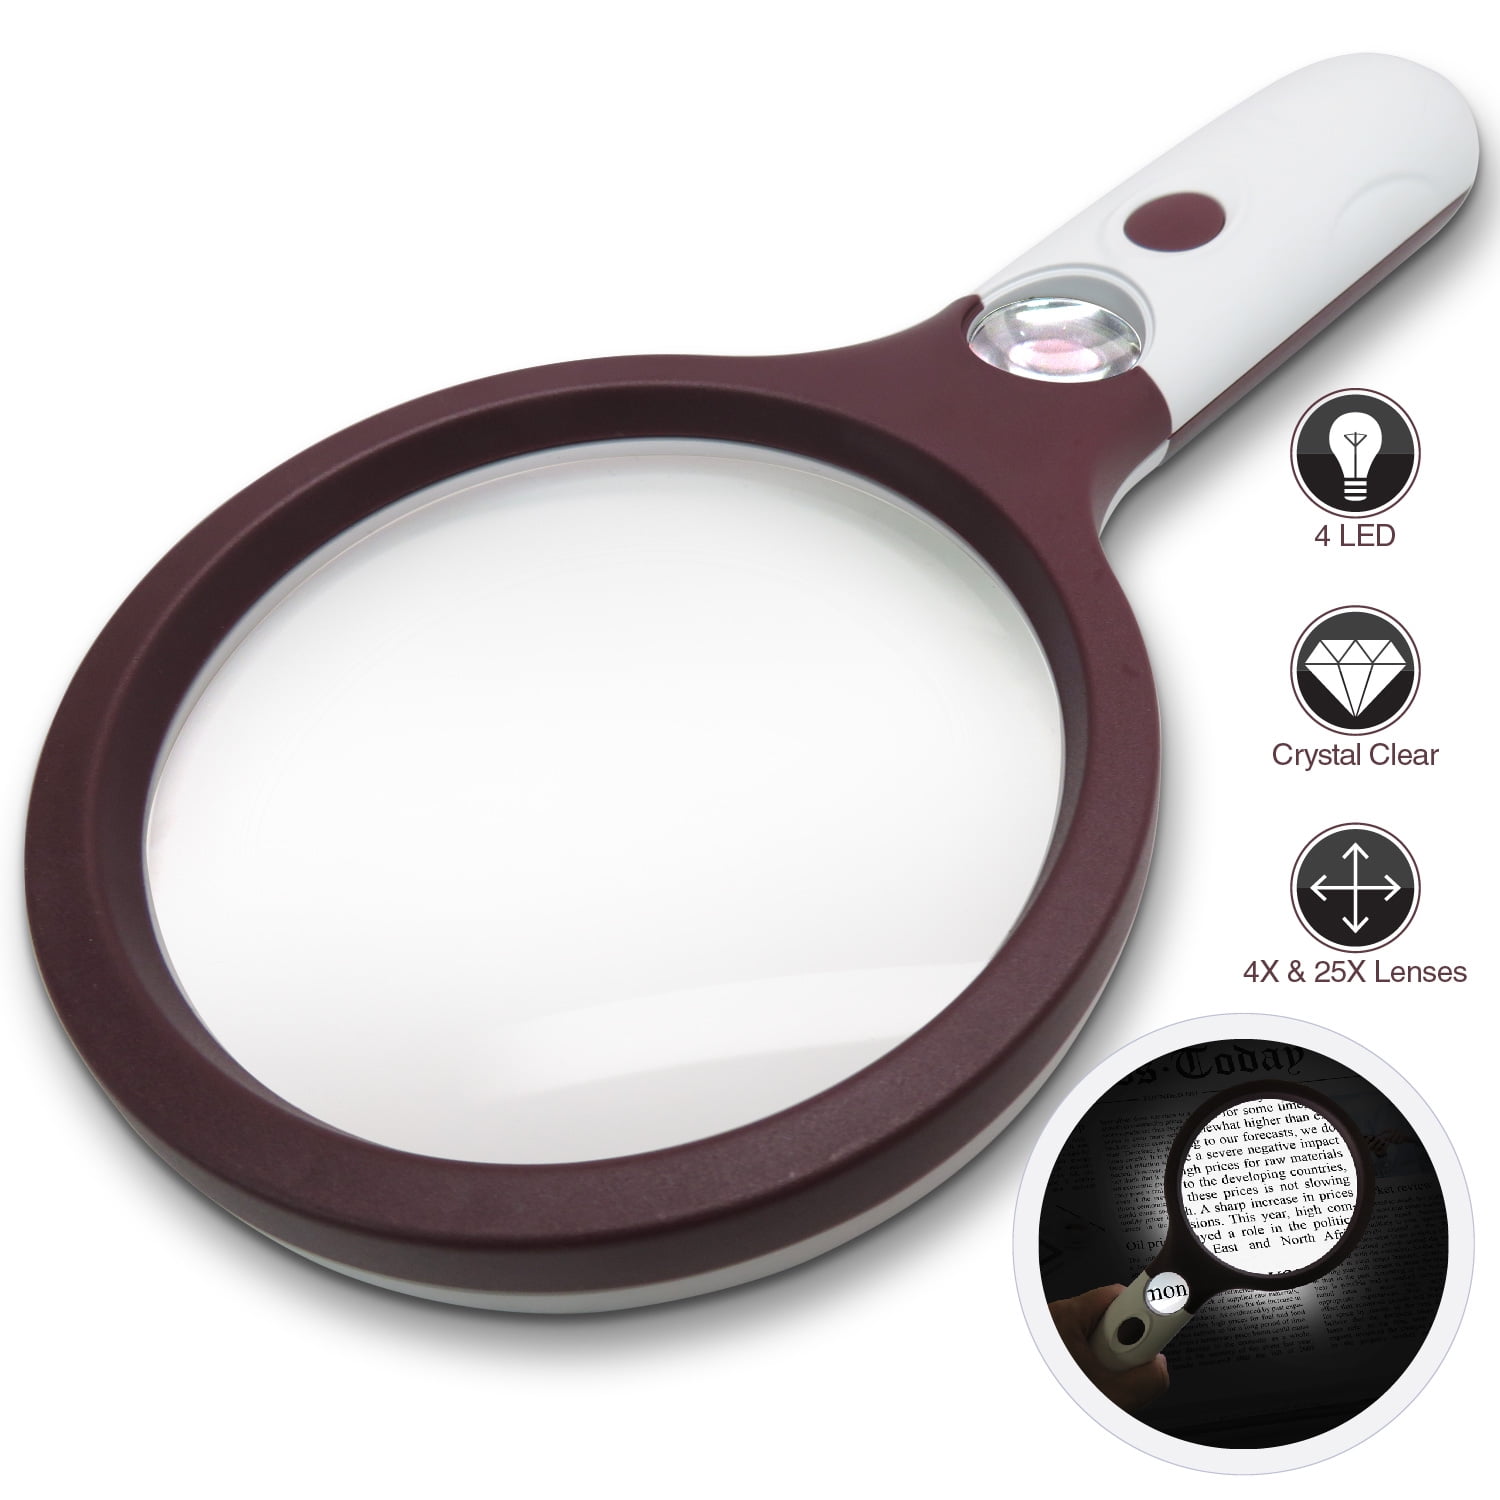  ARTDOT Magnifying Glass with 4 LED Lights, 2 Levels